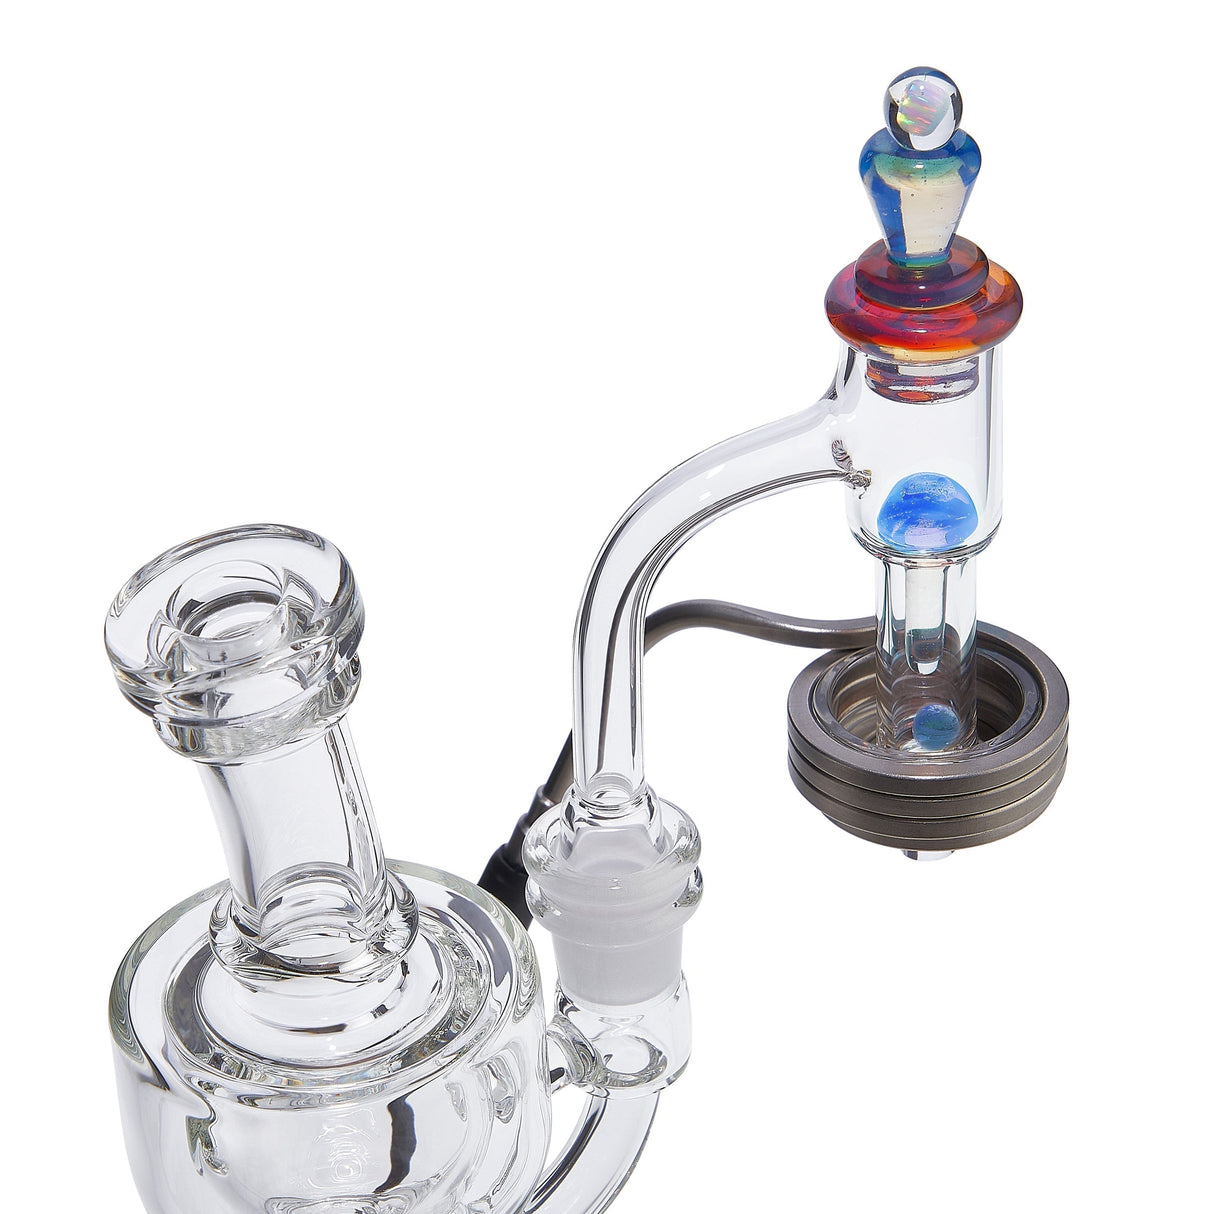 High Five Terp E-Slurper Cap Set for Dab Rigs, angled side view on seamless white background